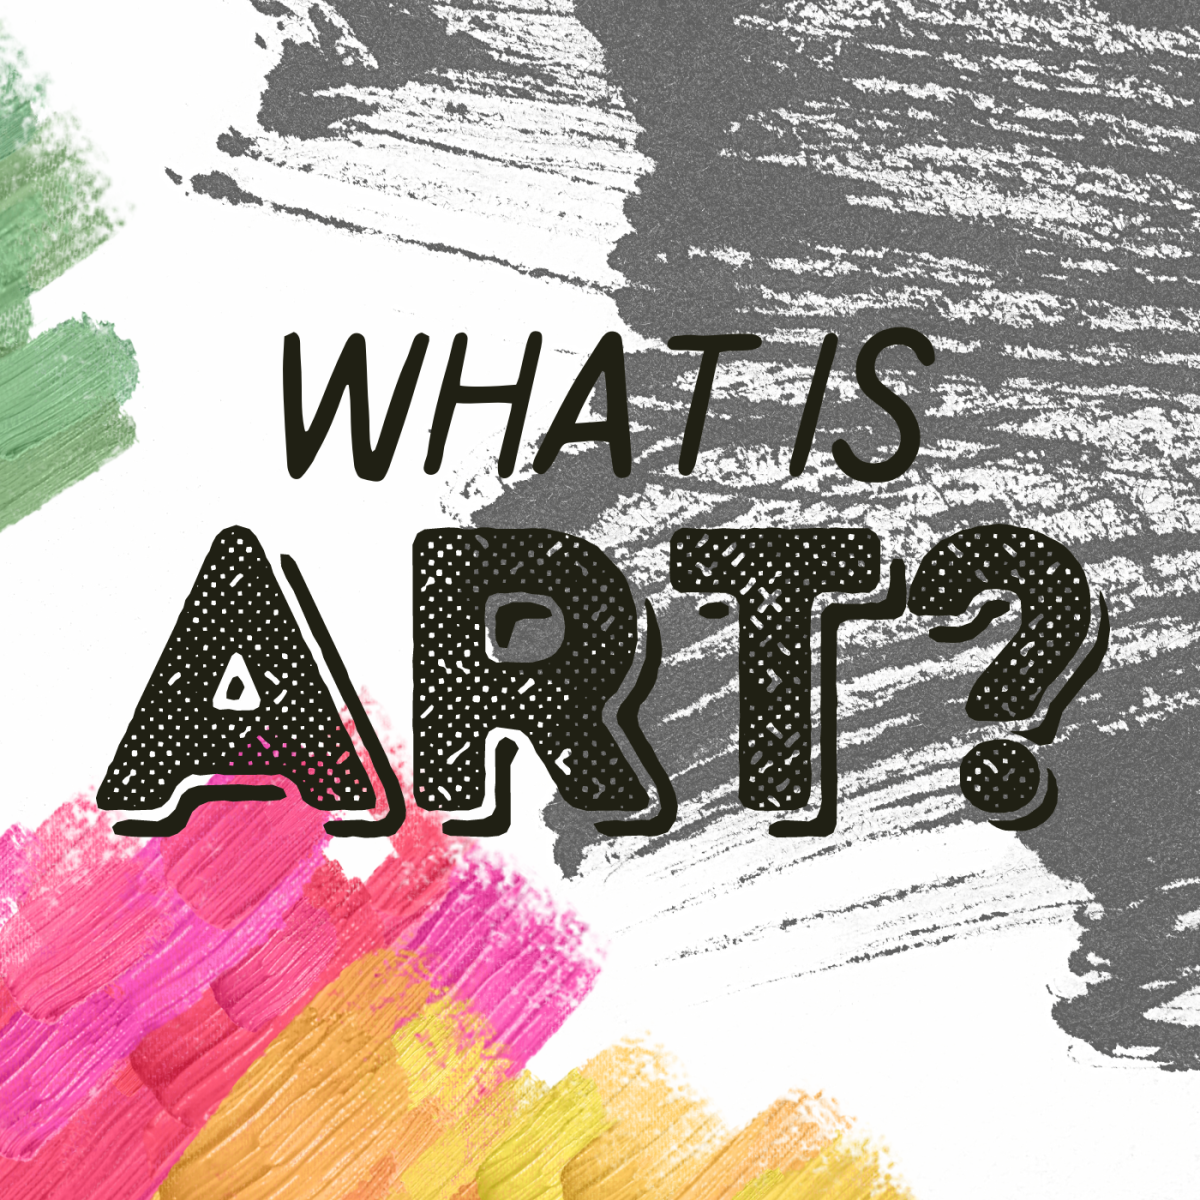 Explore an essay debating what is and is not considered art.